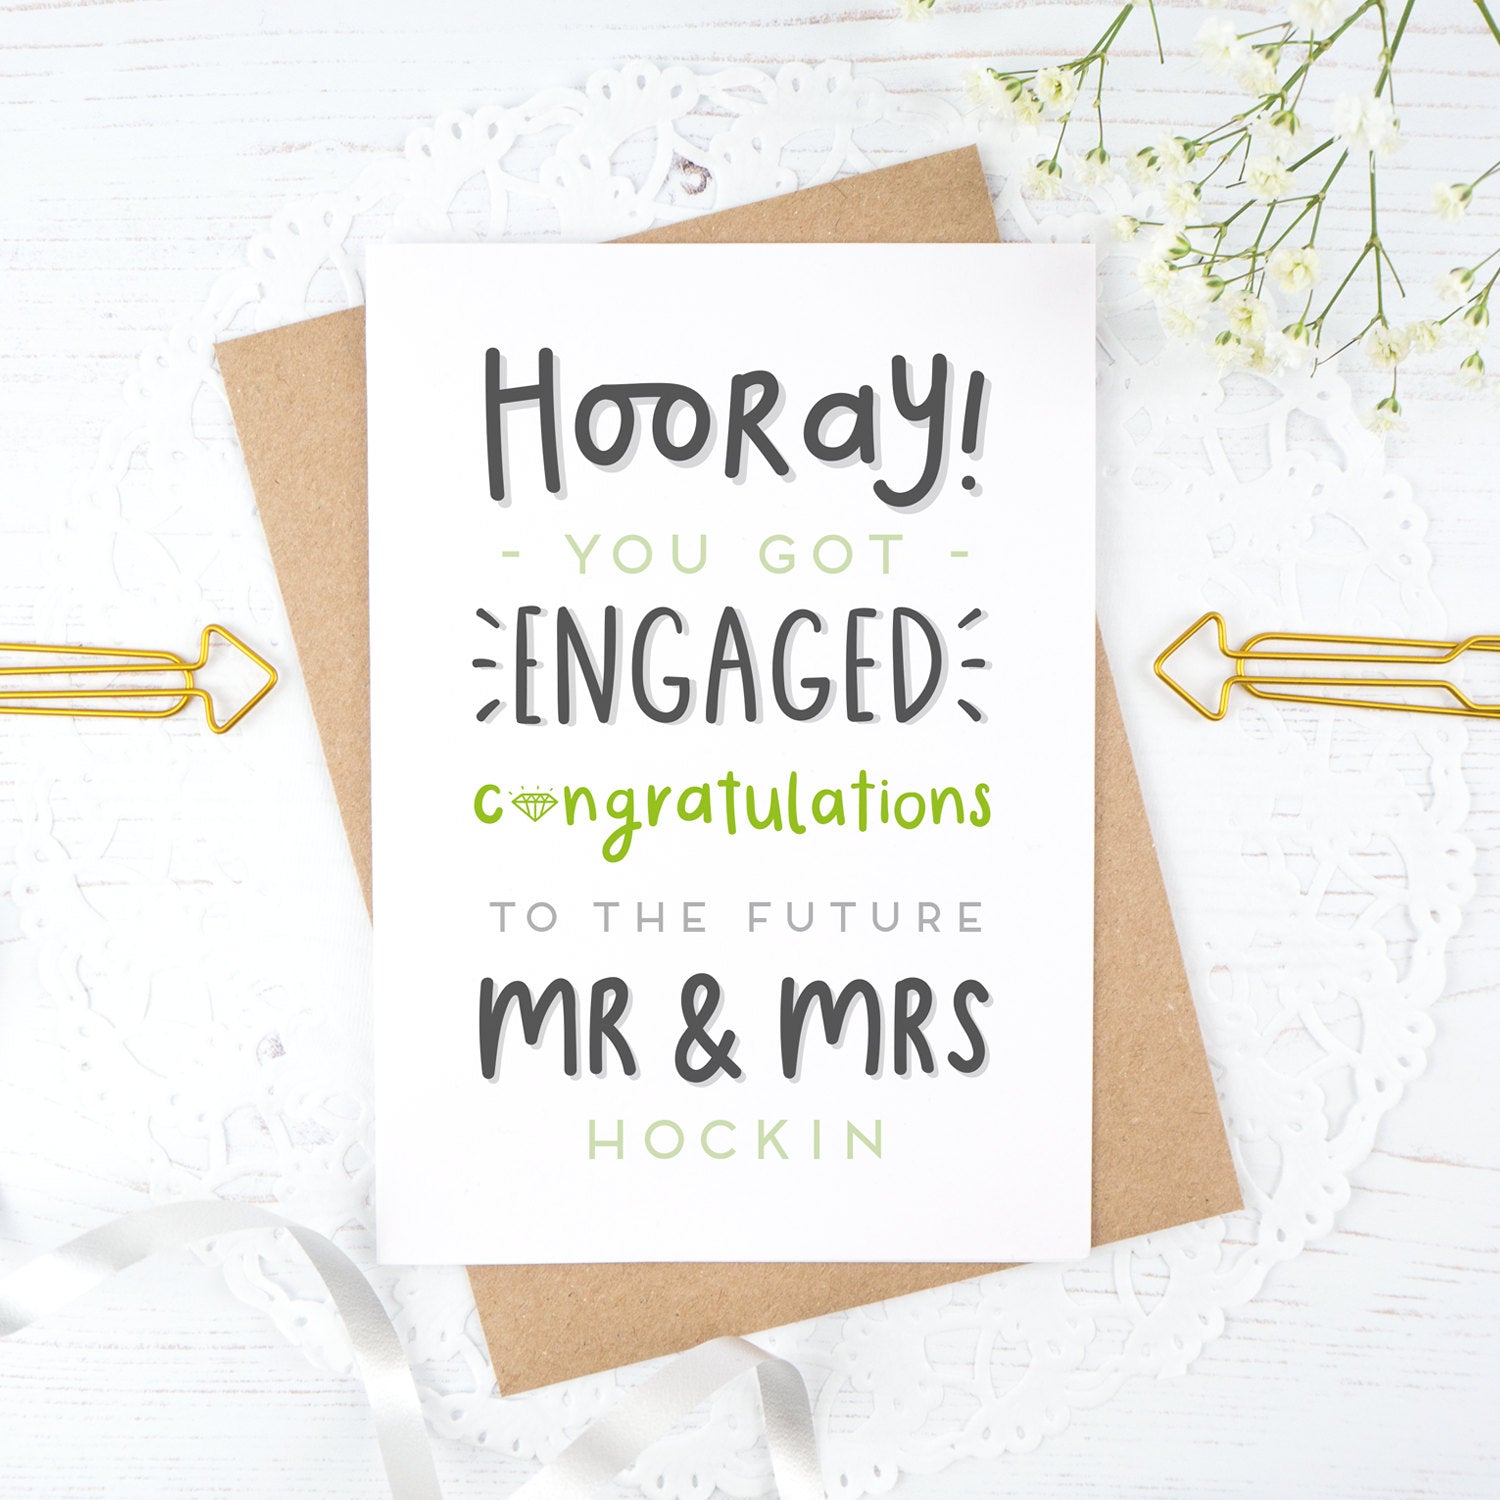 Hooray you got engaged! - Personalised Mr & Mrs engagement card in green